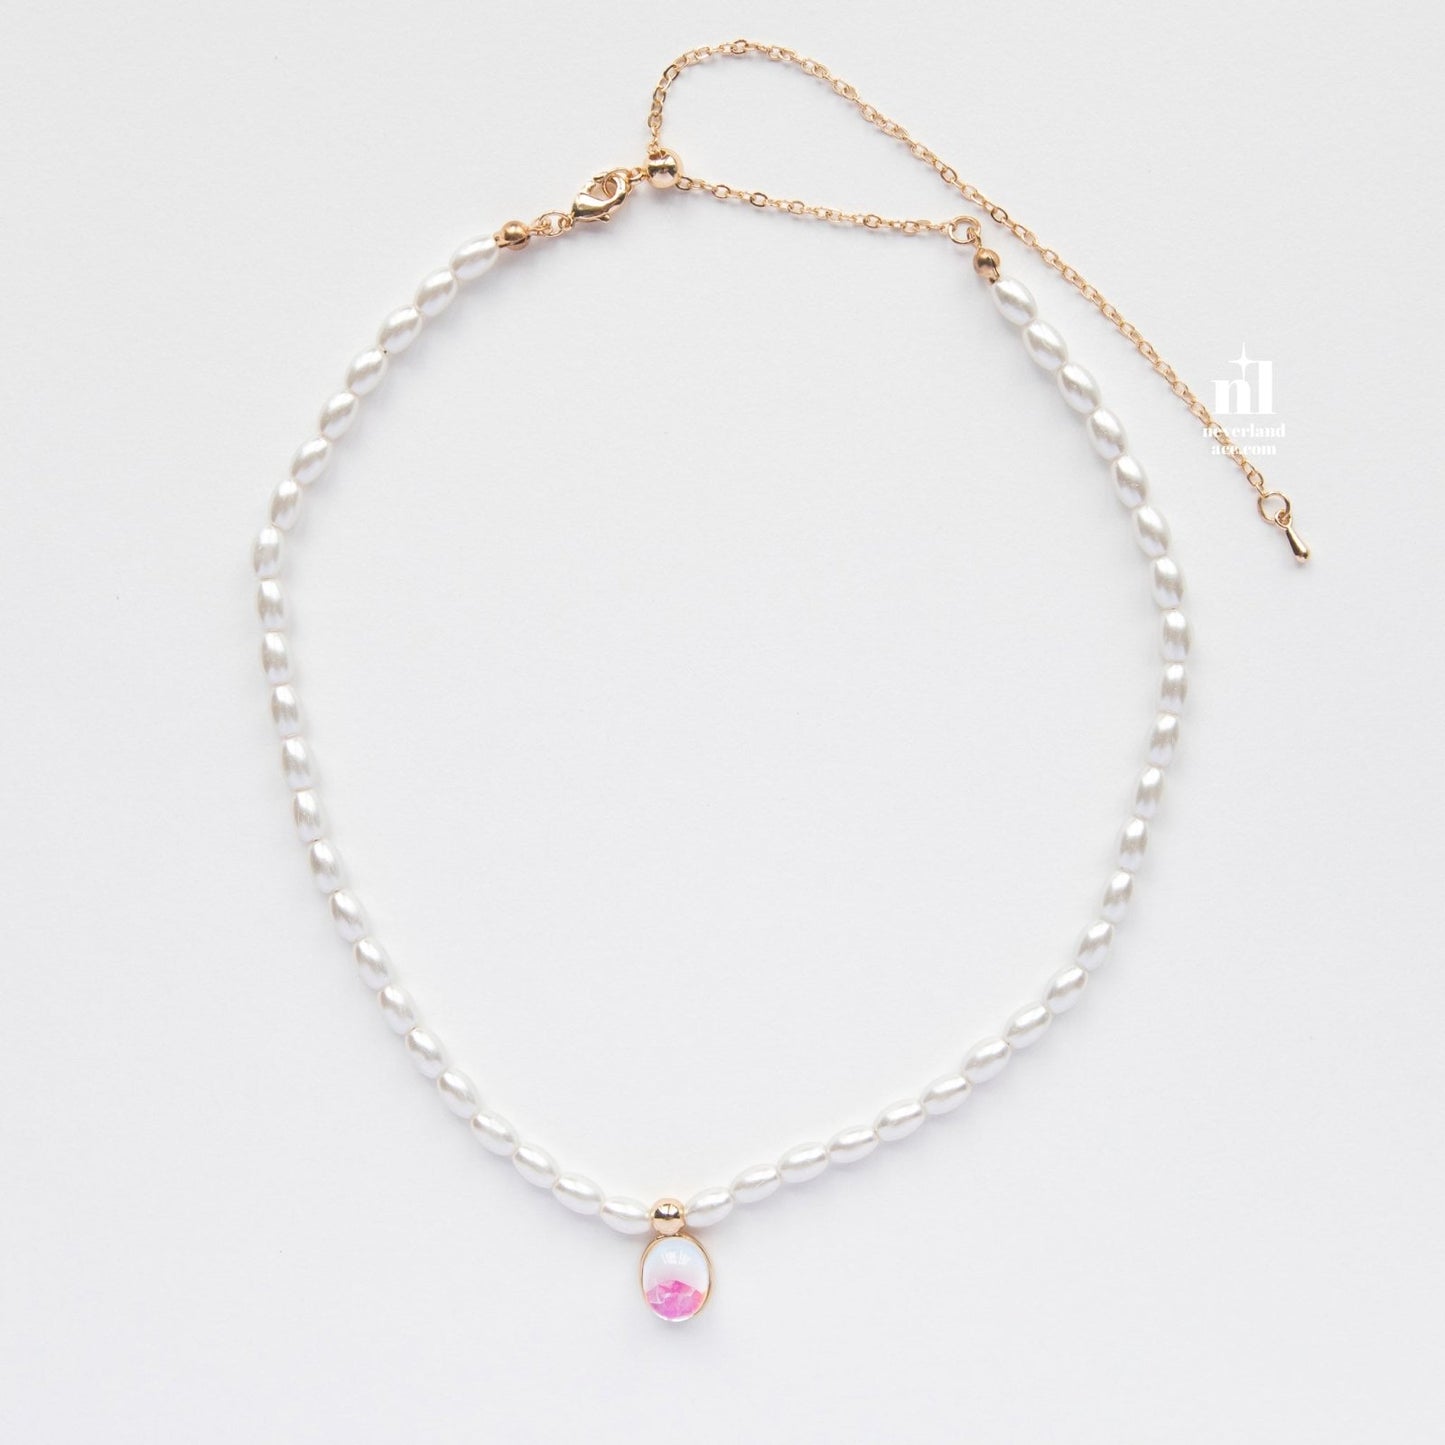 Ambilight Pendant Pearl Necklace - neverland accessories